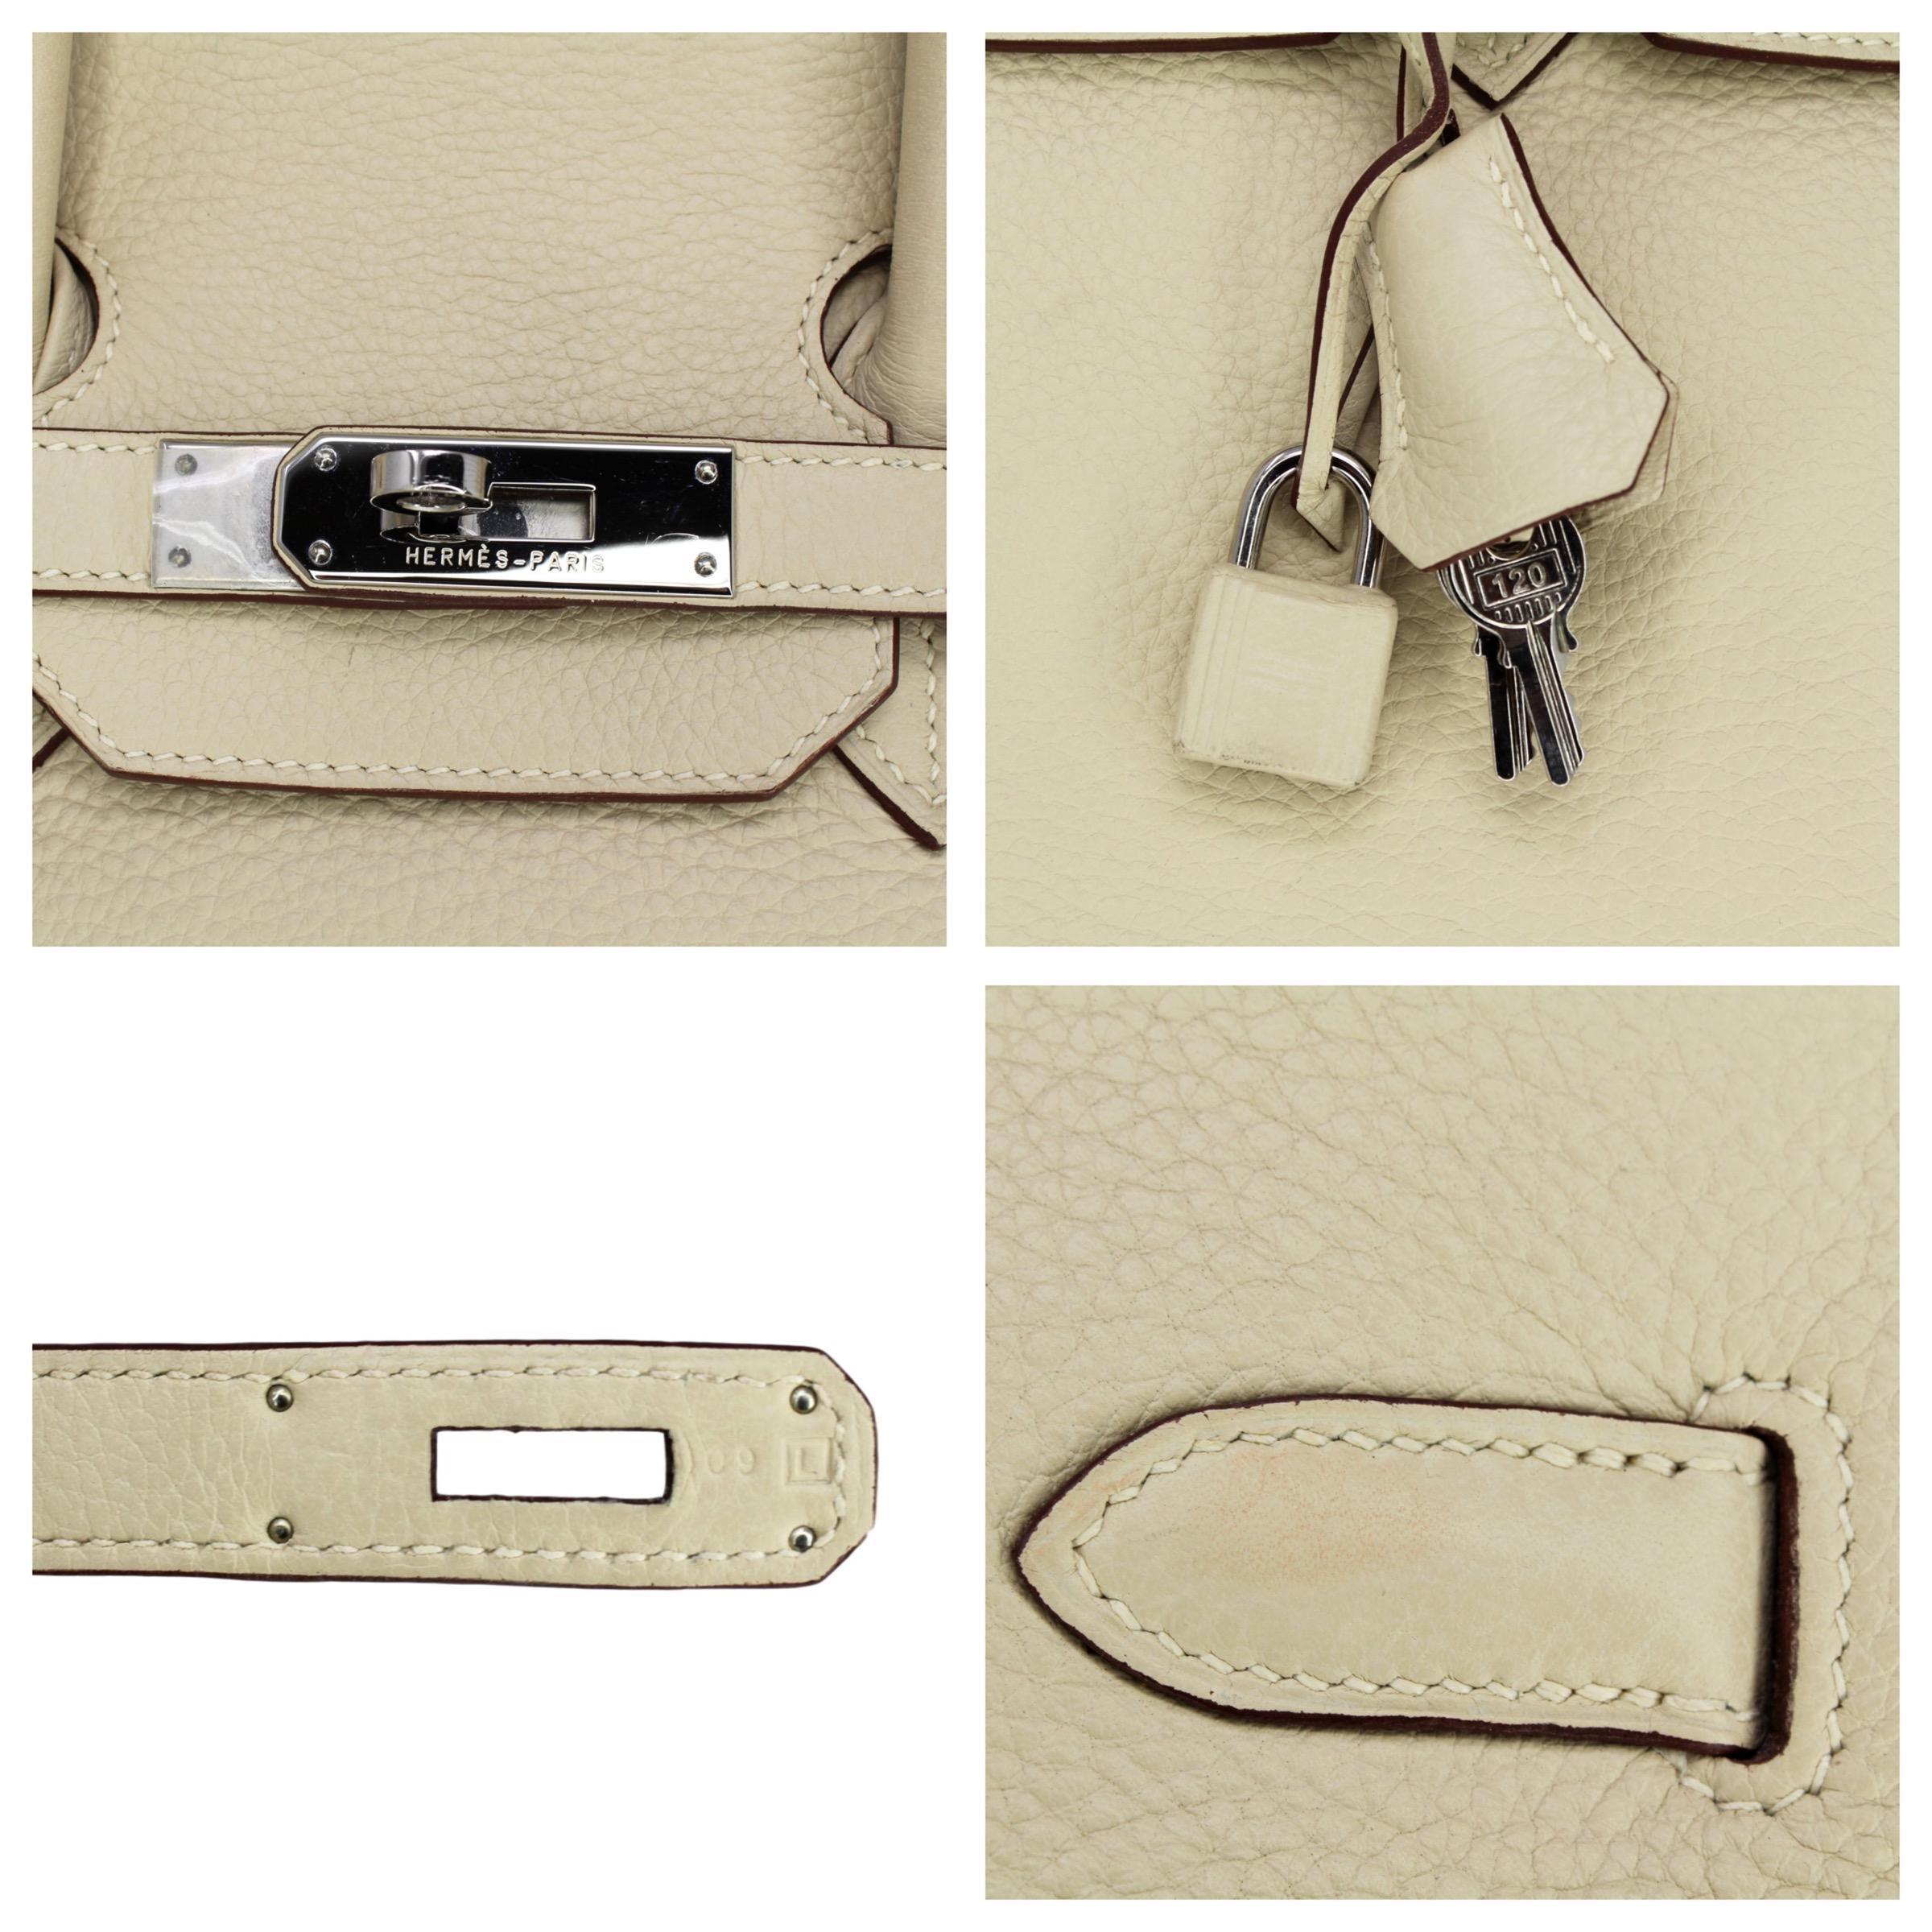 Hermes Birkin 35 Mosaic Special Limited Edition Creme Tan Brown